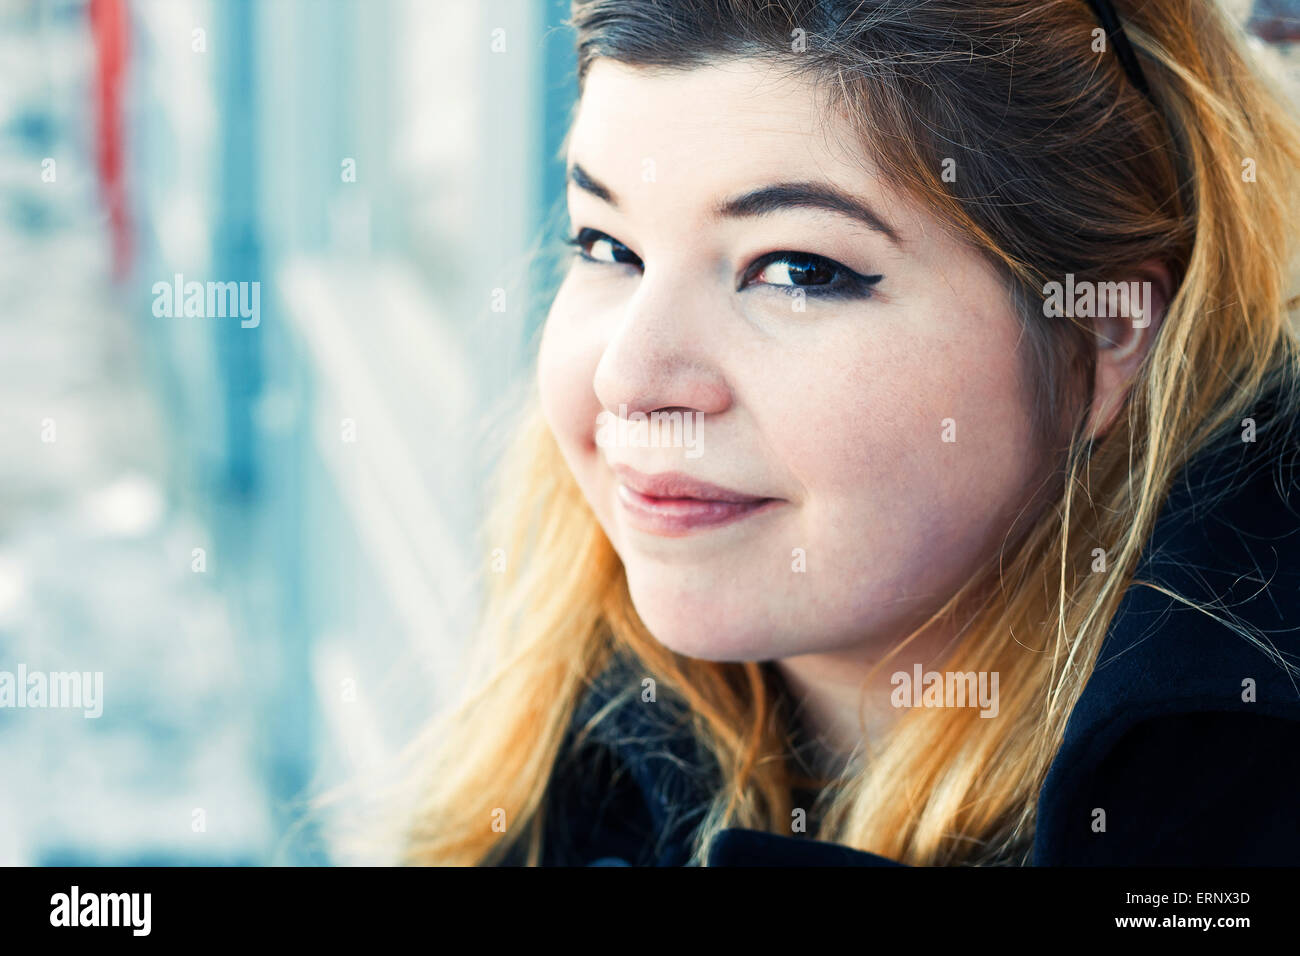 Friendly girl early 20s on location going about her everyday life Stock Photo